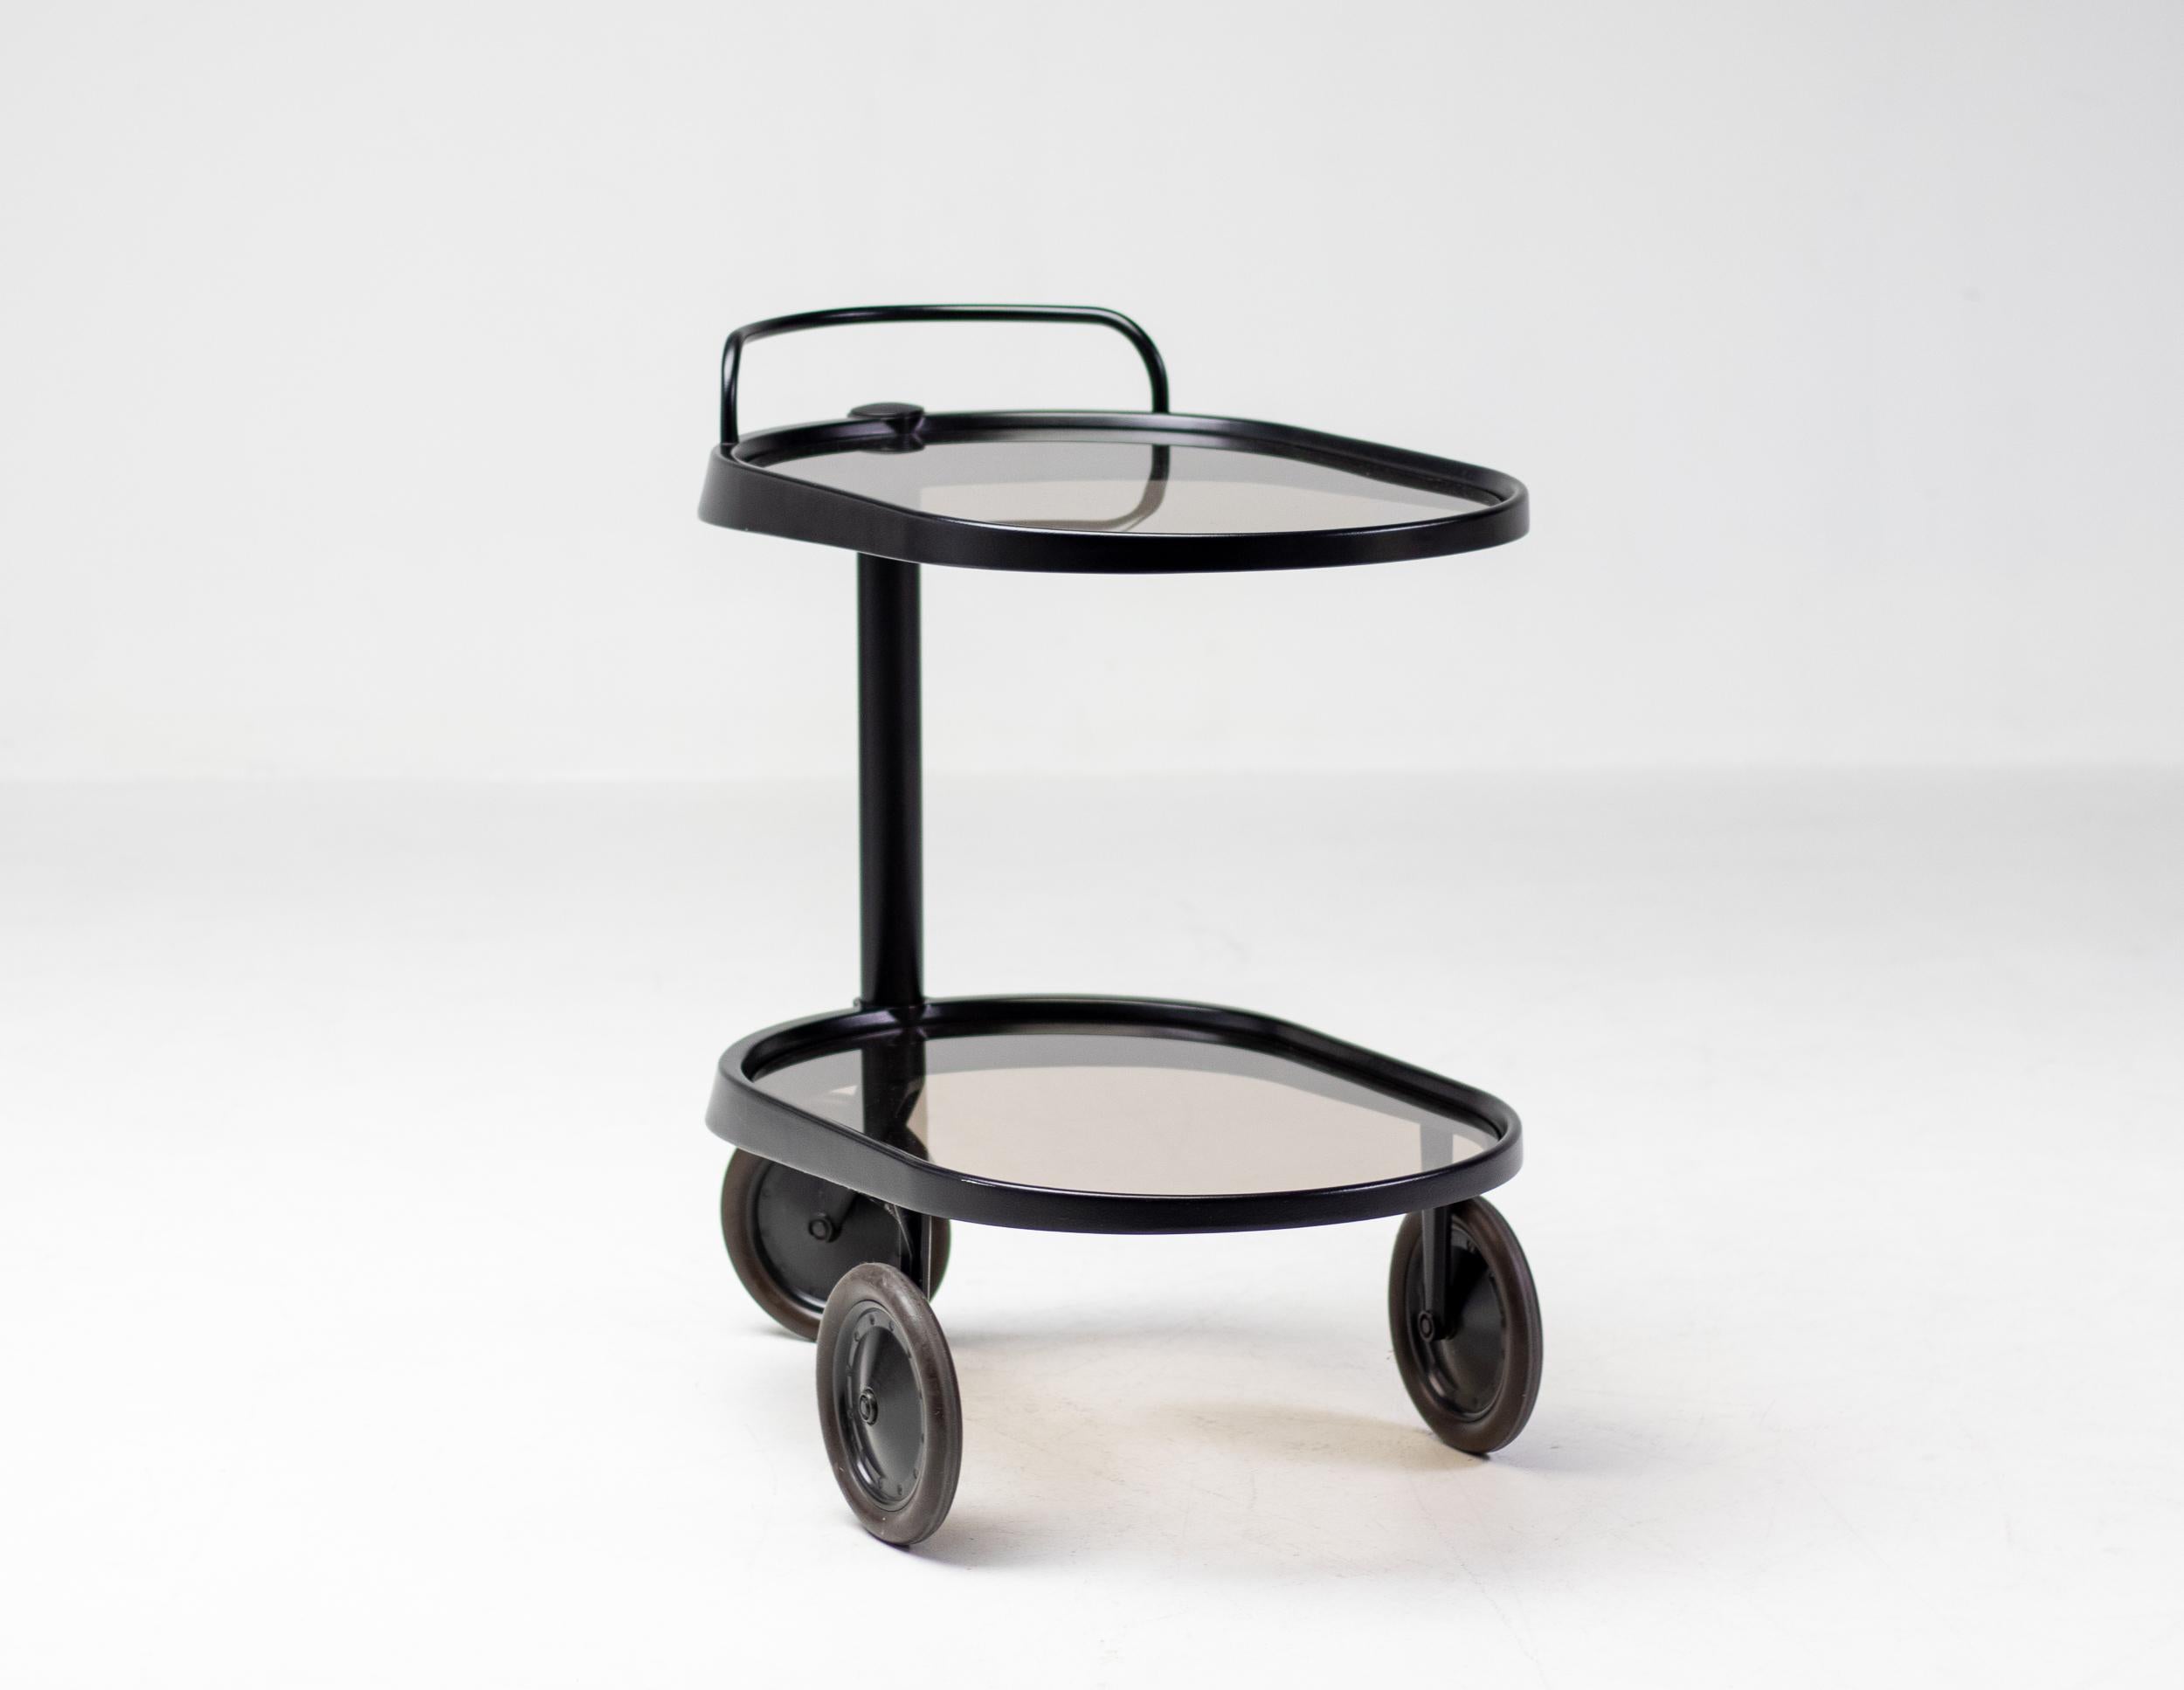 Modern trolley designed by Enzo Mari for Alessi in 1989.
Handlebar above a cylindrical shaft side support, on three wheels, stamped Alessi.
Very hard to find and in this color.

Enzo Mari was an Italian modernist artist and furniture designer